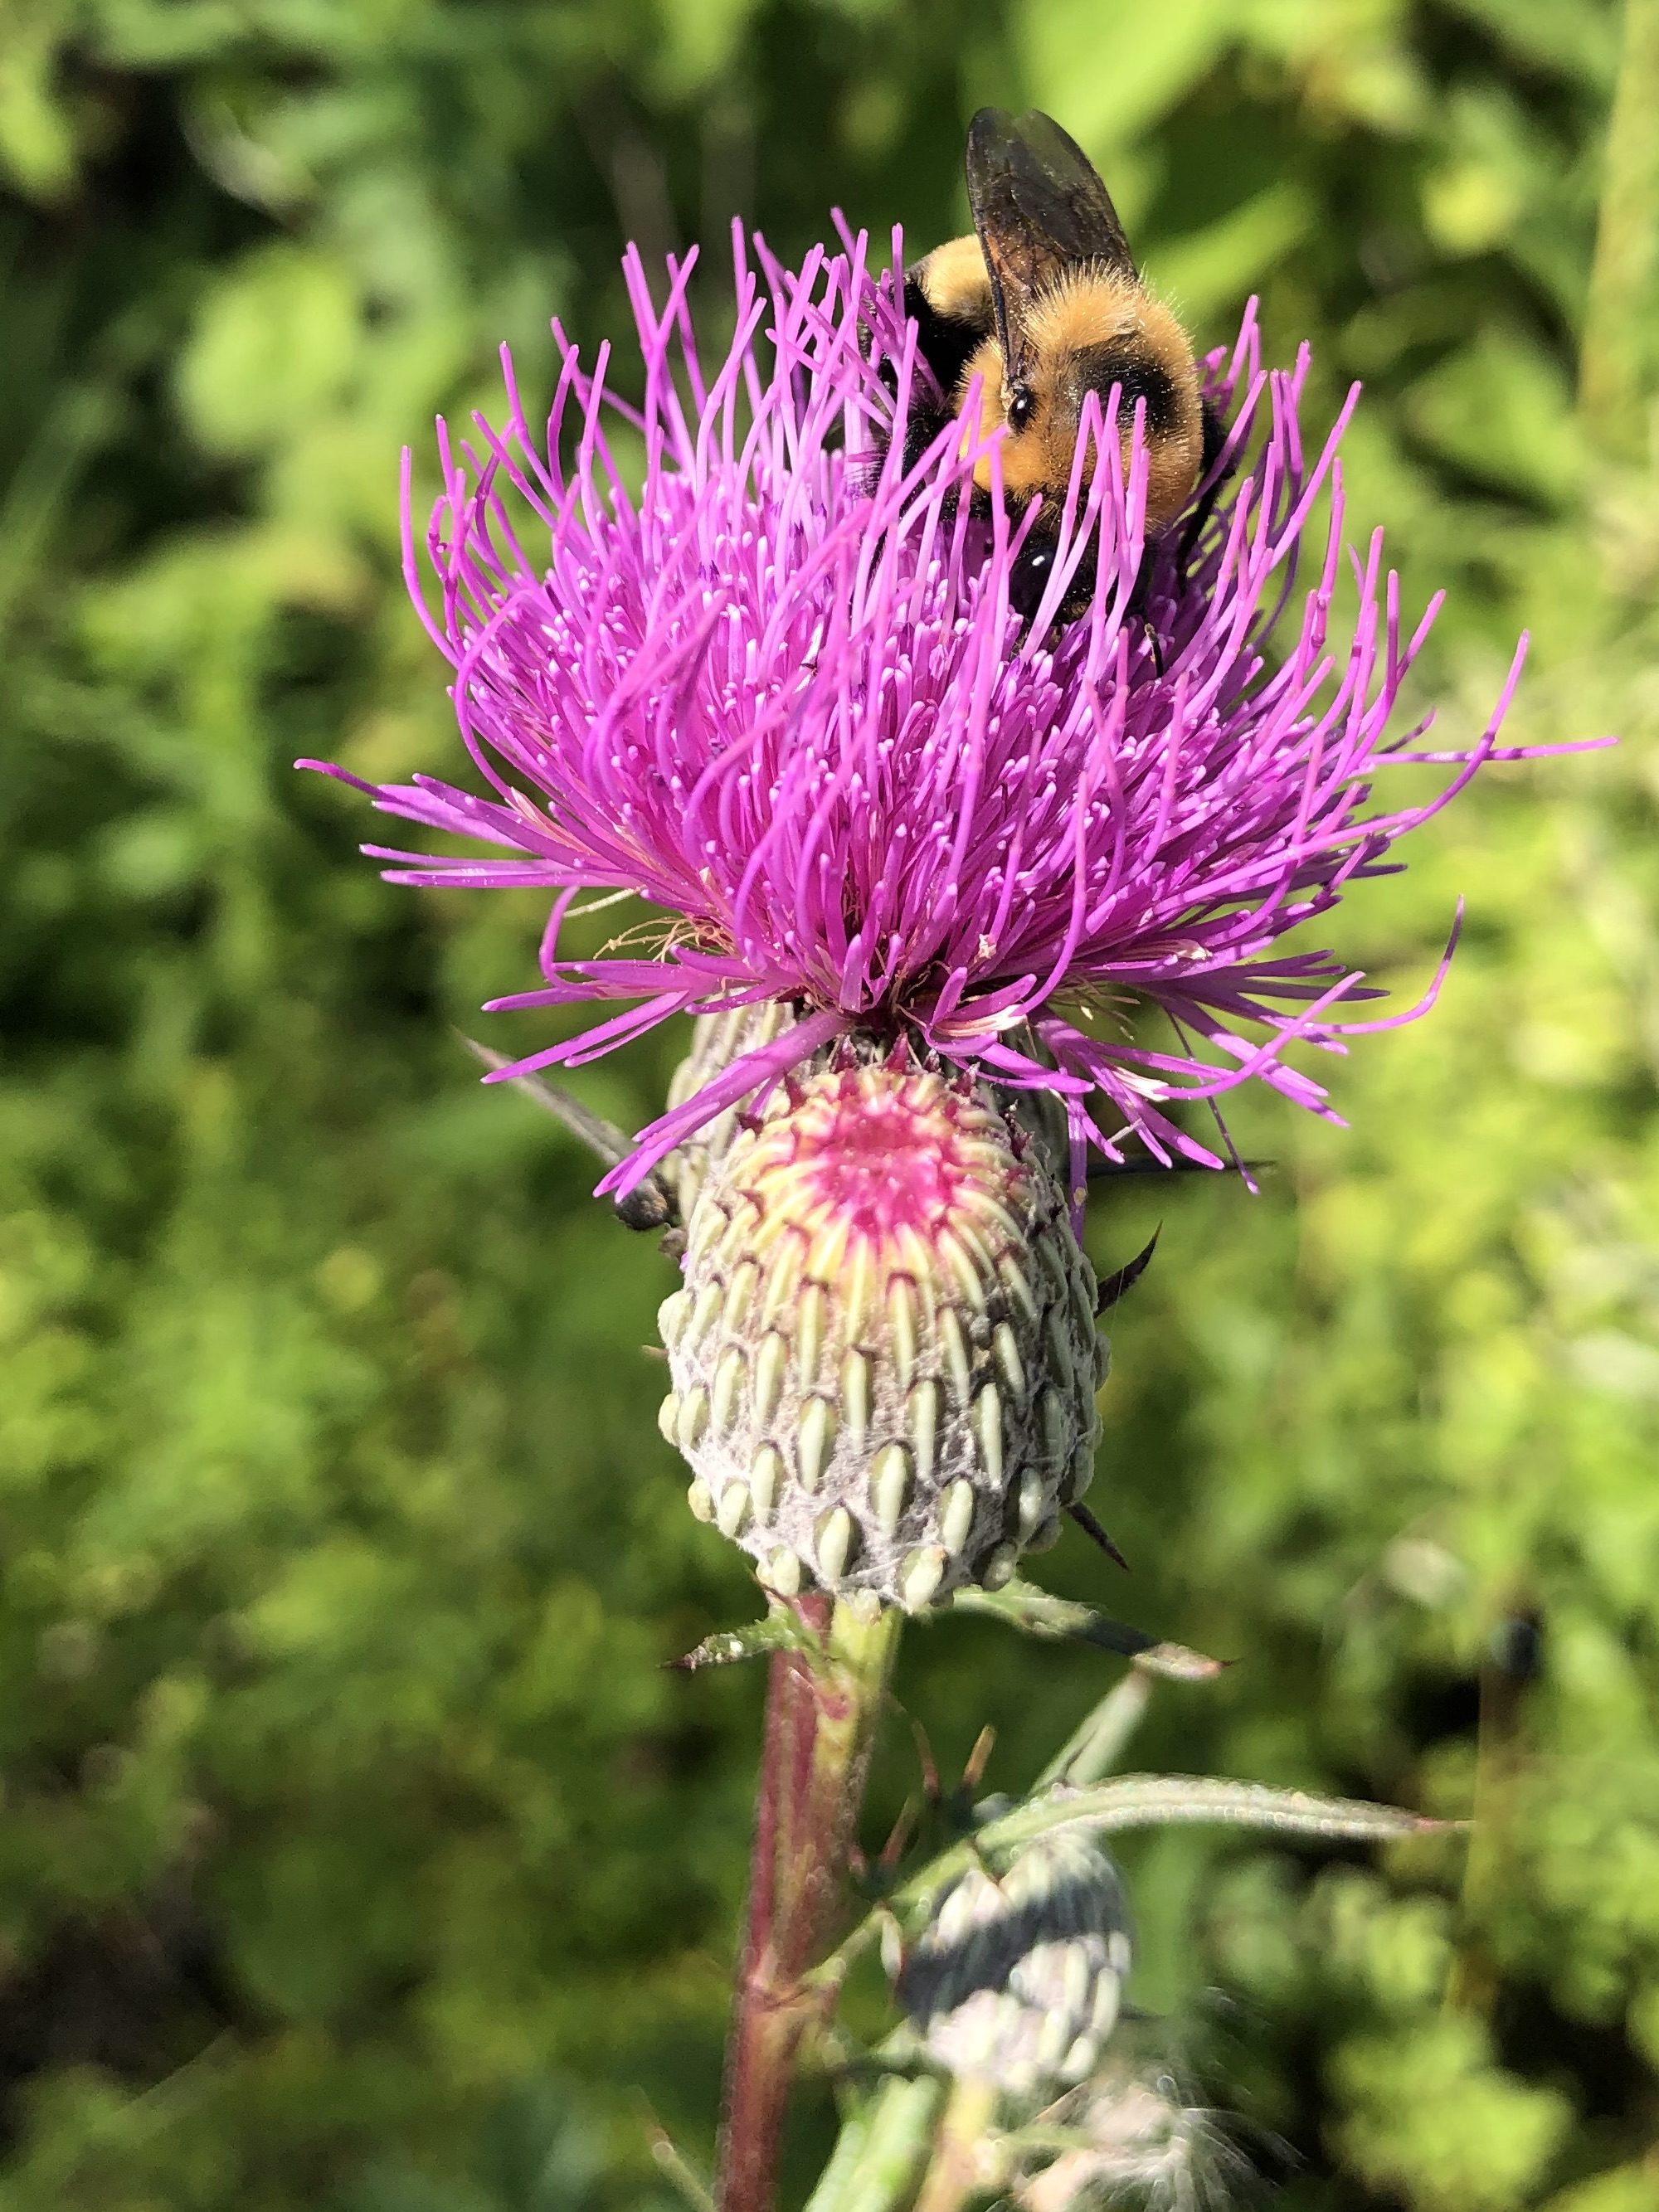 Swamp Thistle near cattails along shore of Lake Wingra along Arboretum Drive in Madison, Wisconsin on August 22, 2022.